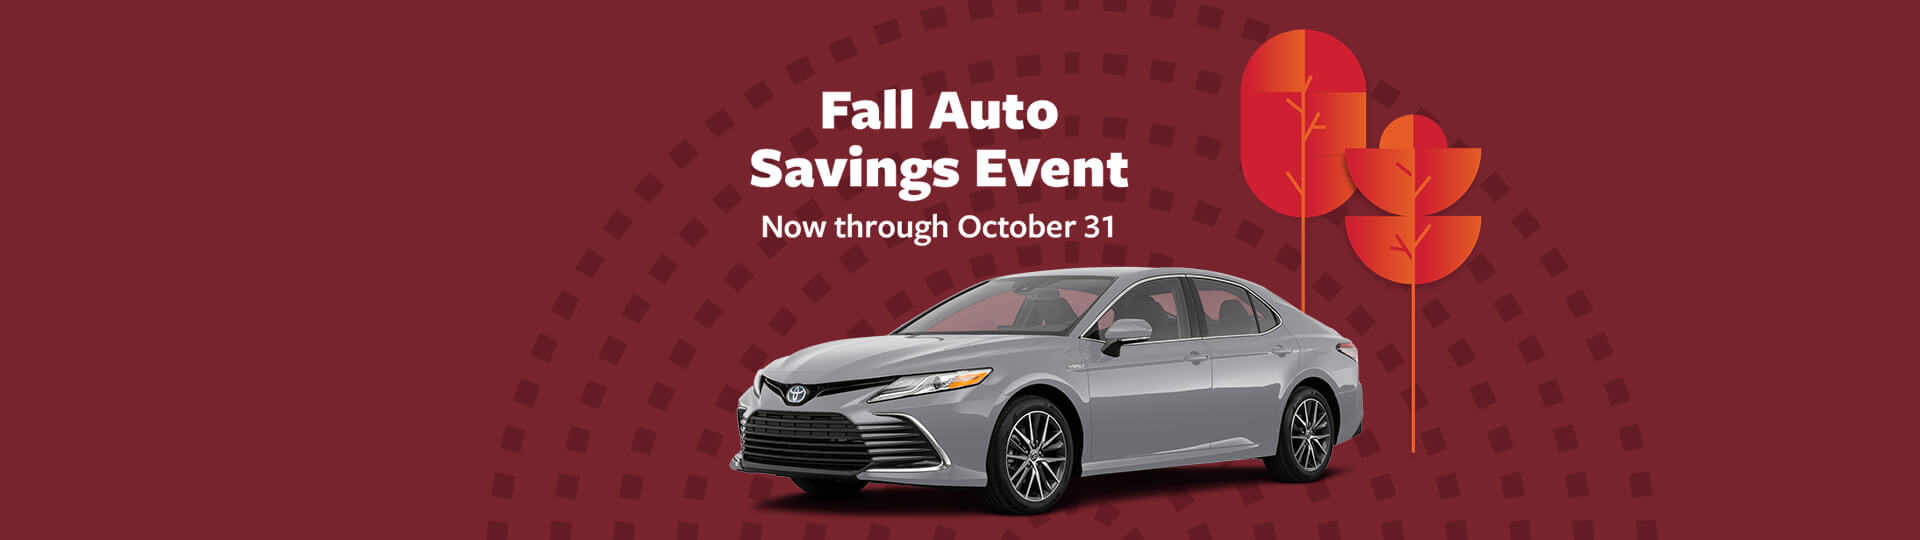 Car next to leaf for Fall Auto Savings